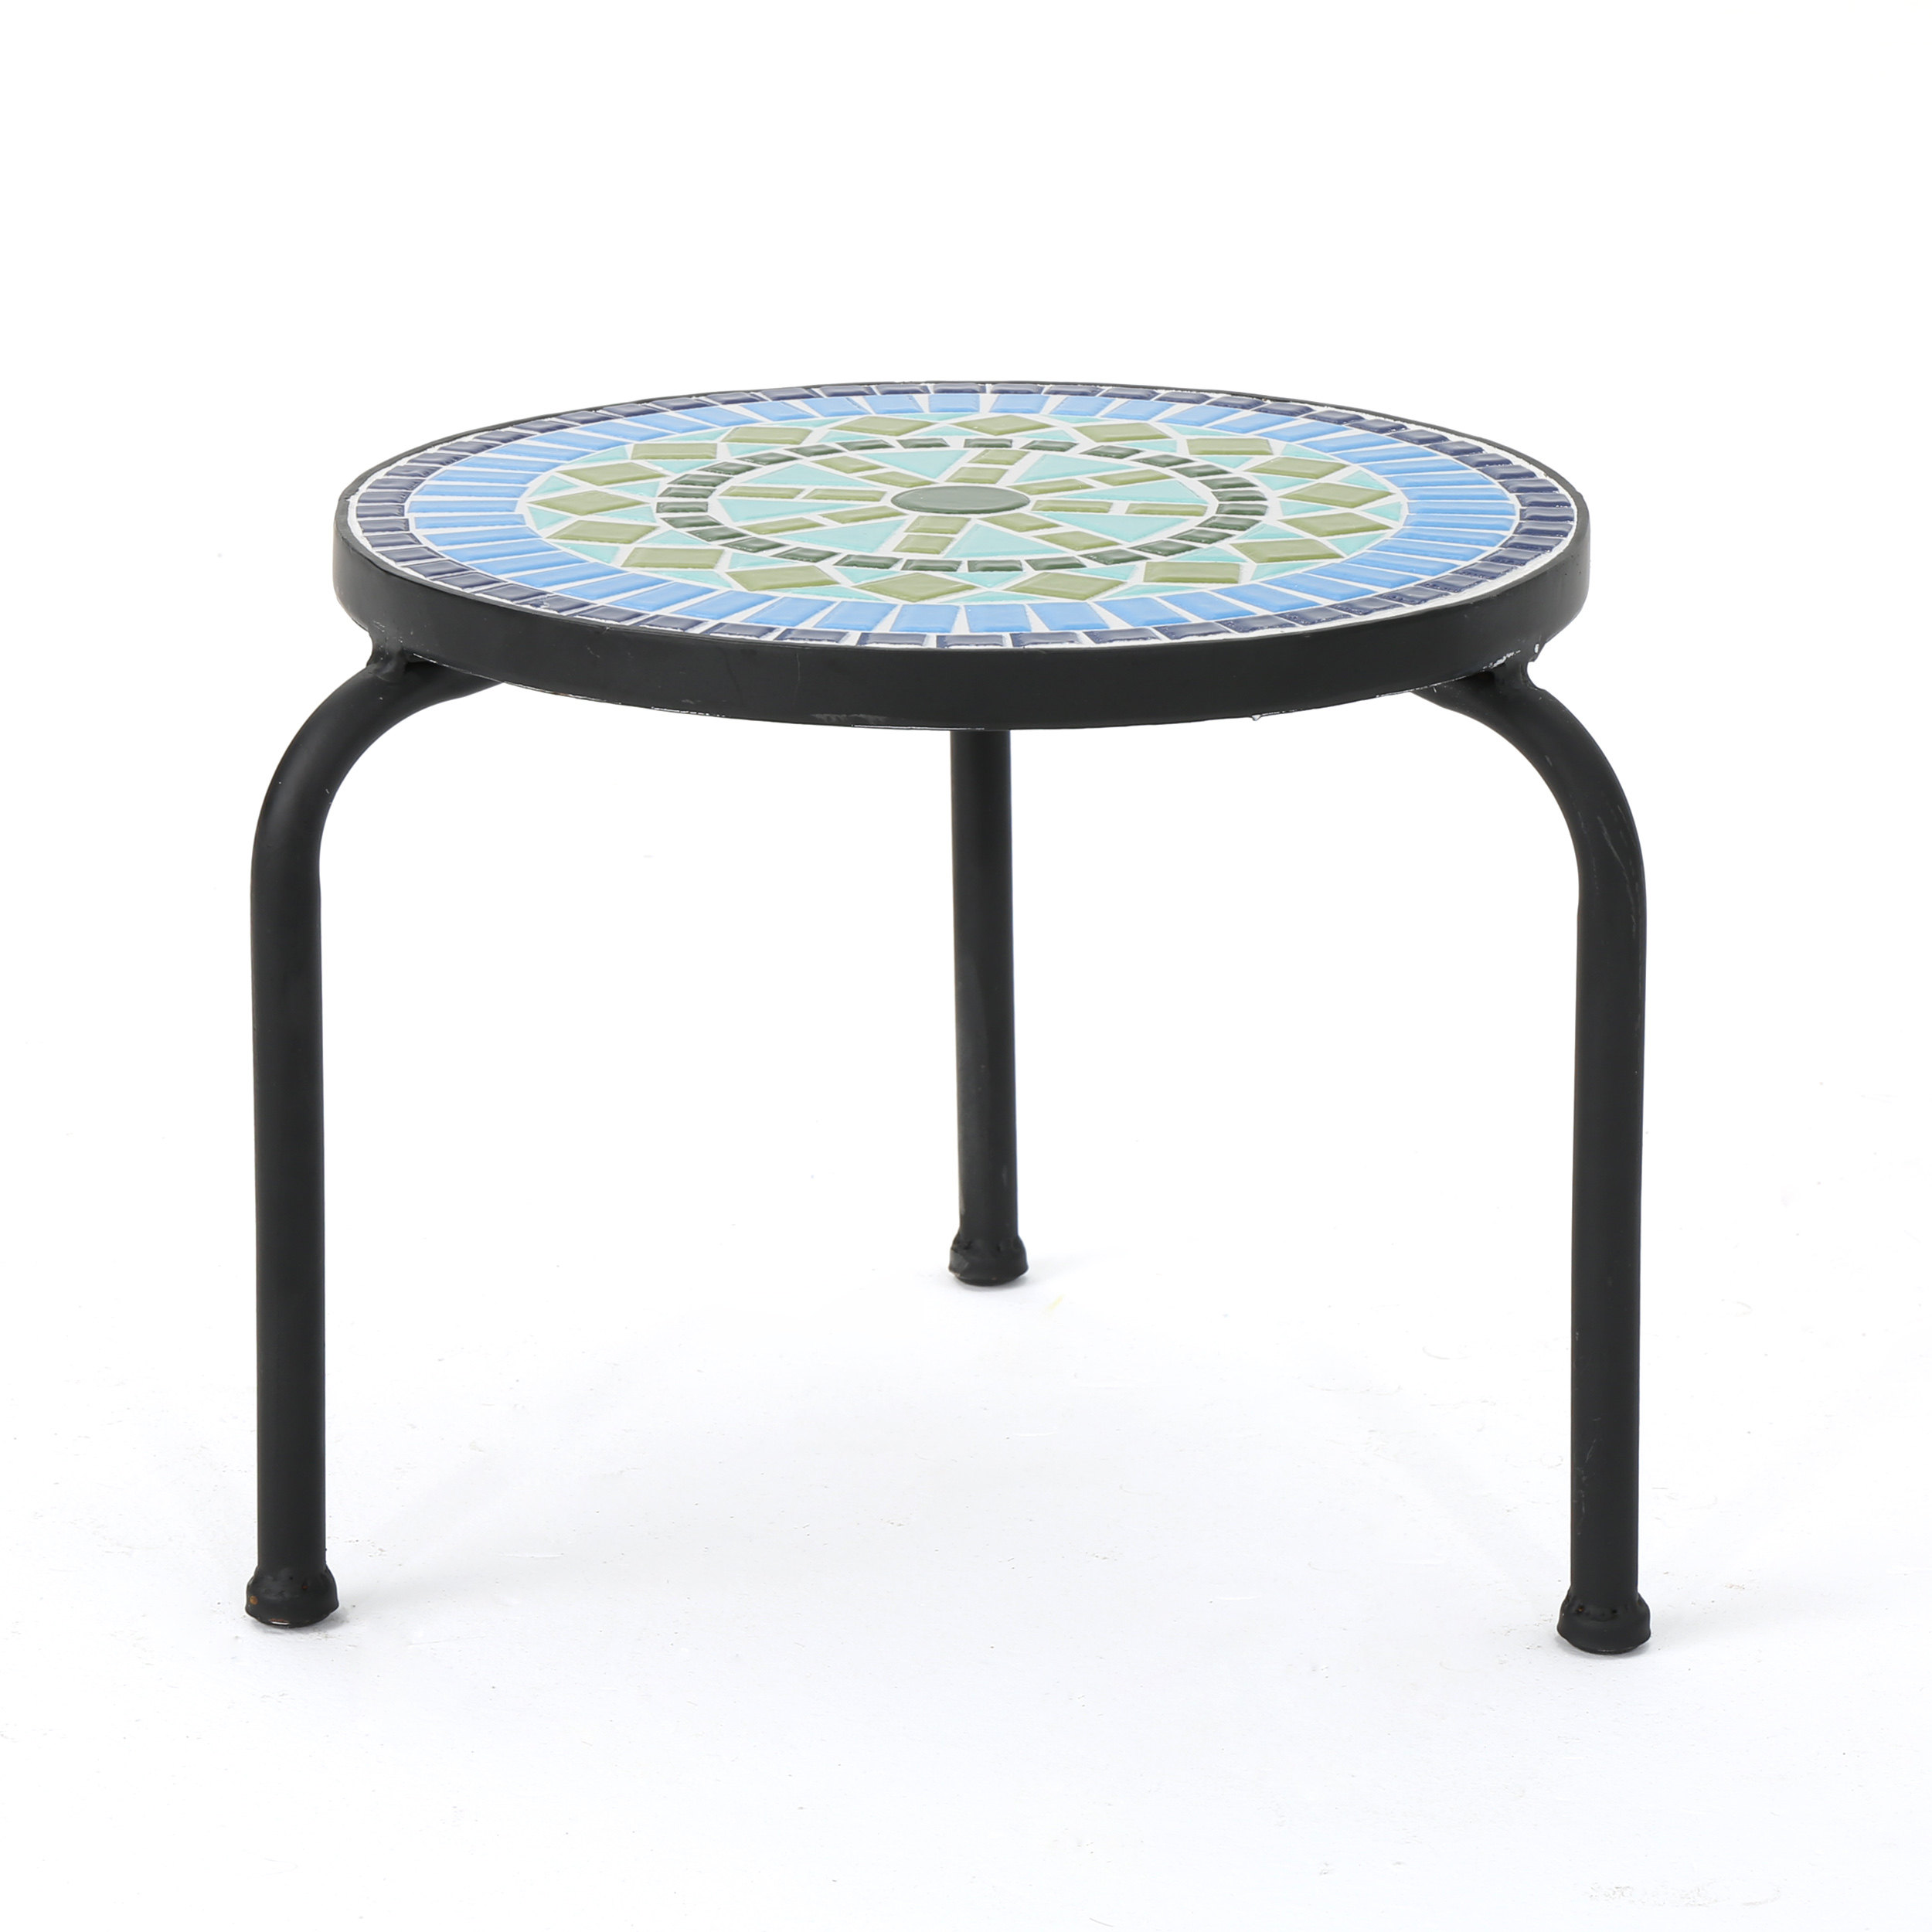 Noble House Martina Outdoor Ceramic Tile Side Table with Iron Frame, Blue and Green - image 1 of 7